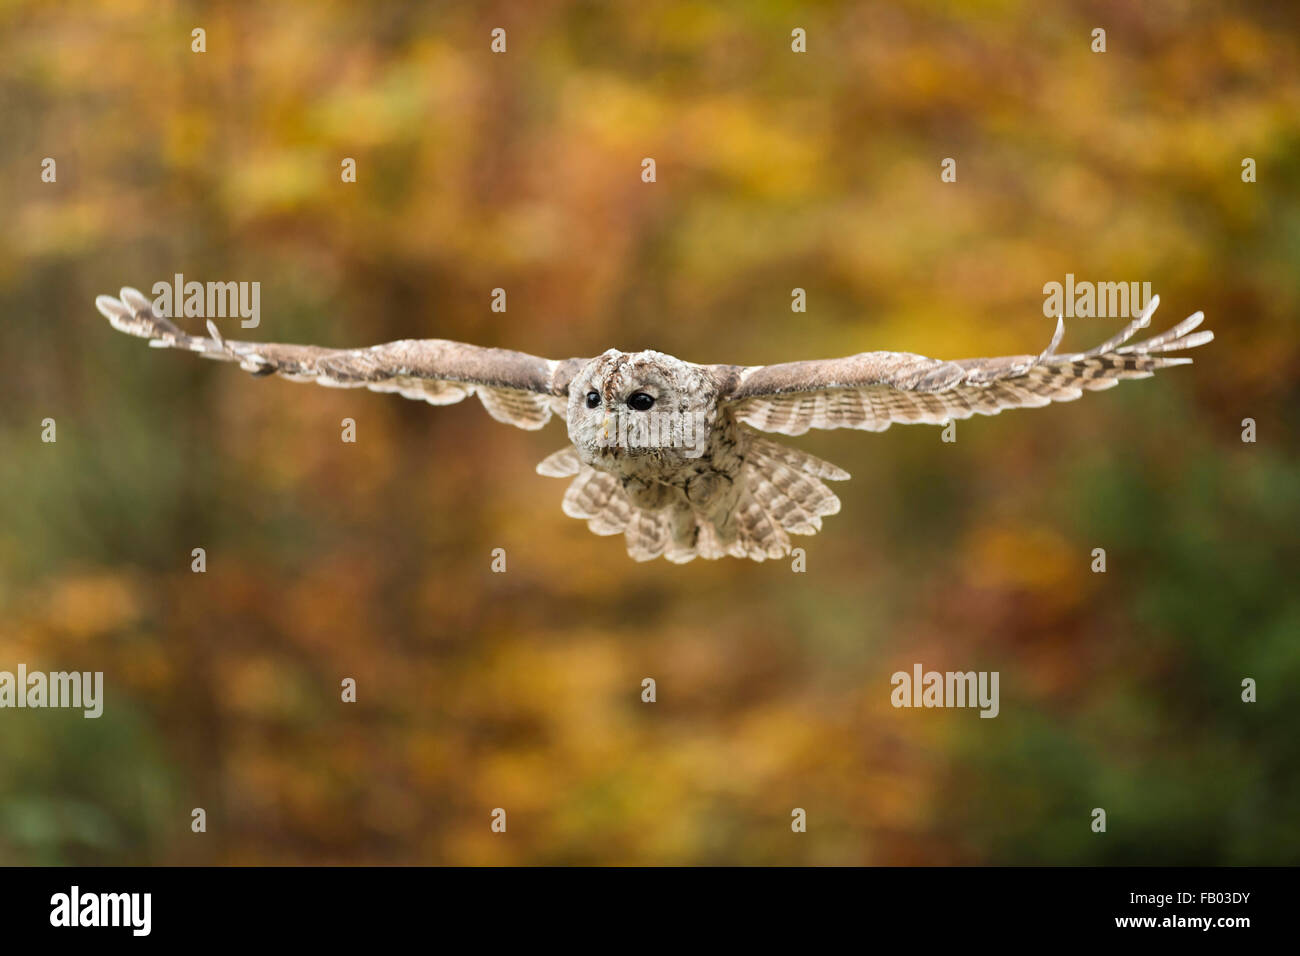 Tawny Owl / Waldkauz ( Strix aluco ) in flight in front of bright yellow green leaves, autumnal background colors. Stock Photo